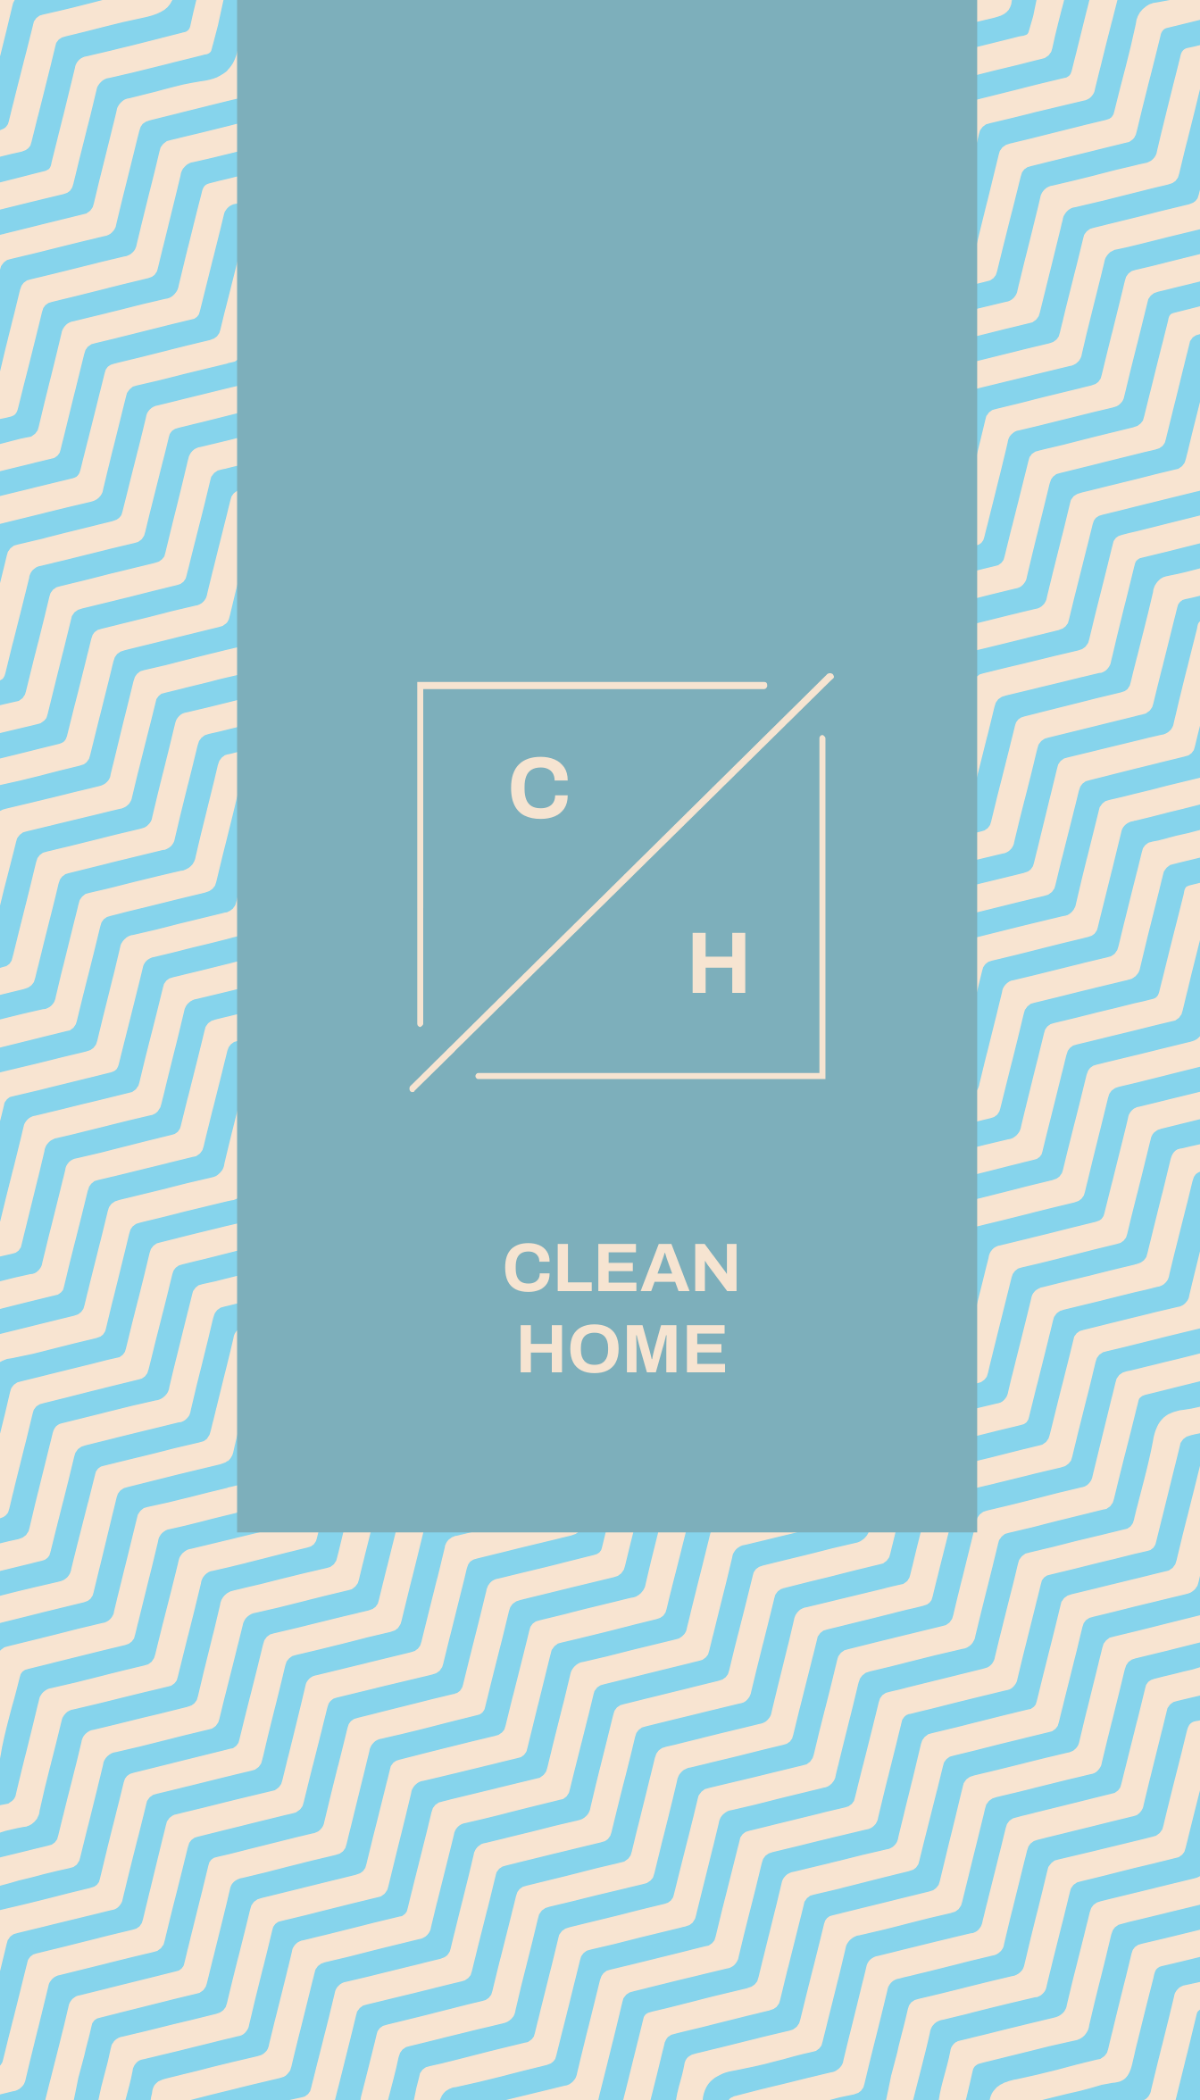 House Cleaning Business Card Template